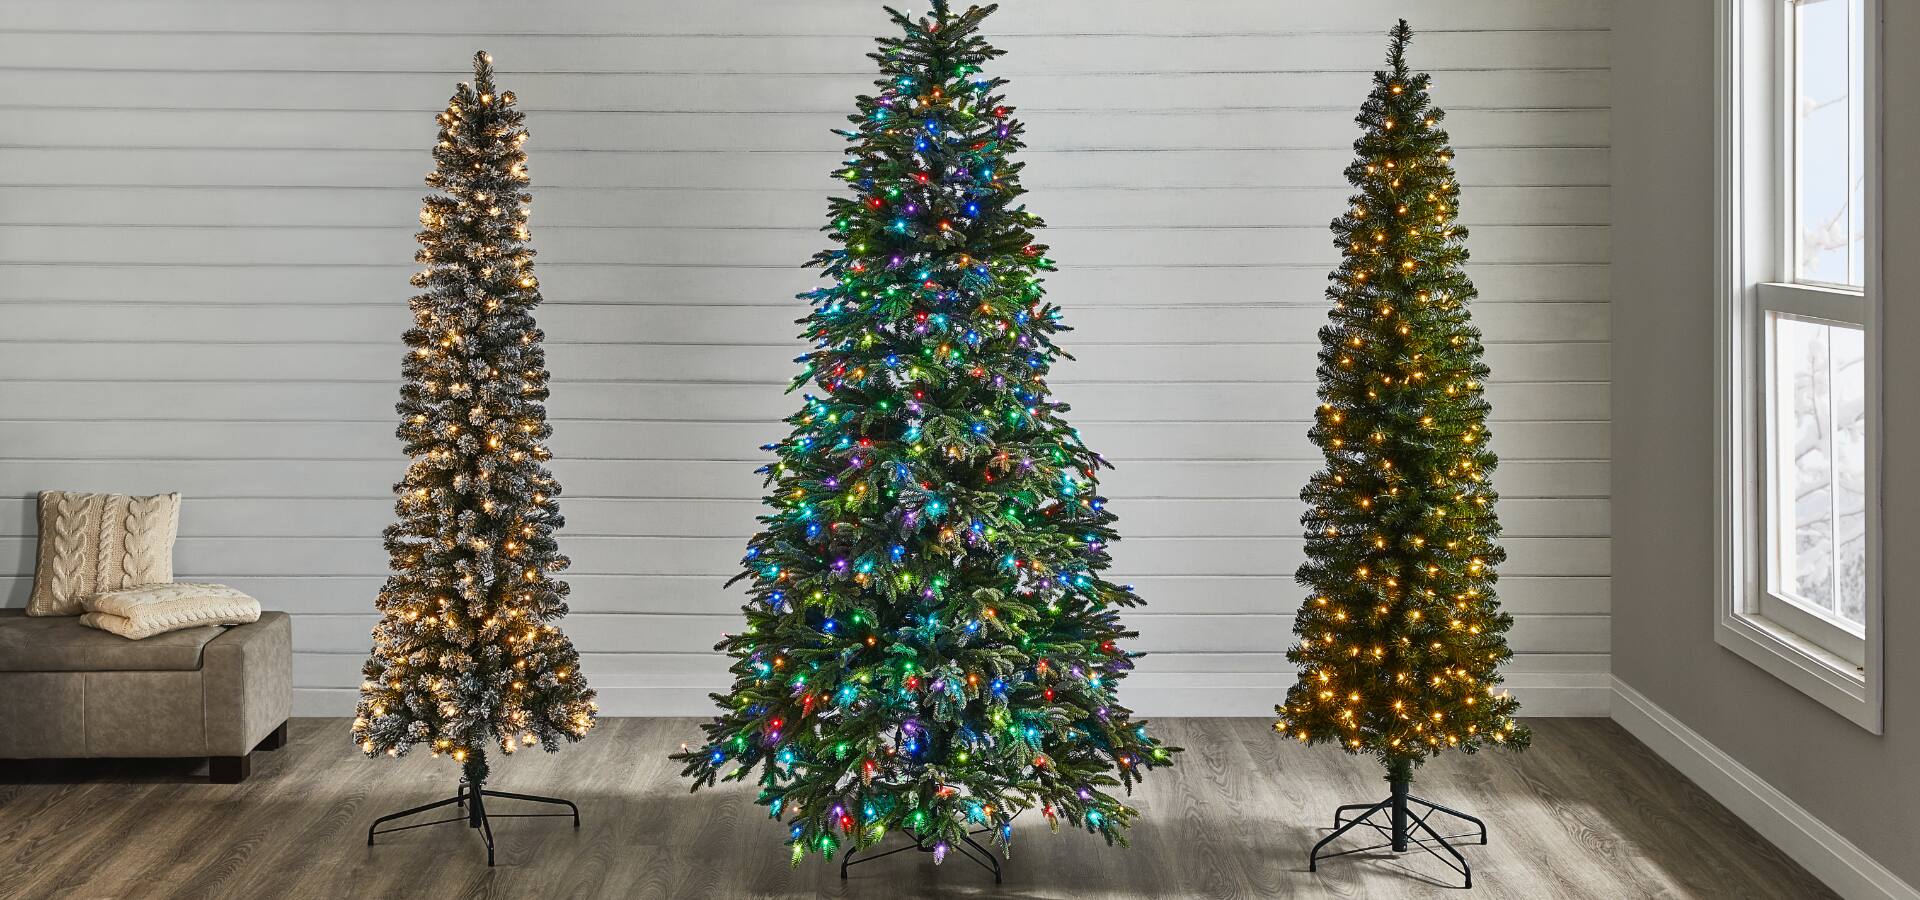 Three Christmas trees in k3 sizes lit up on display.